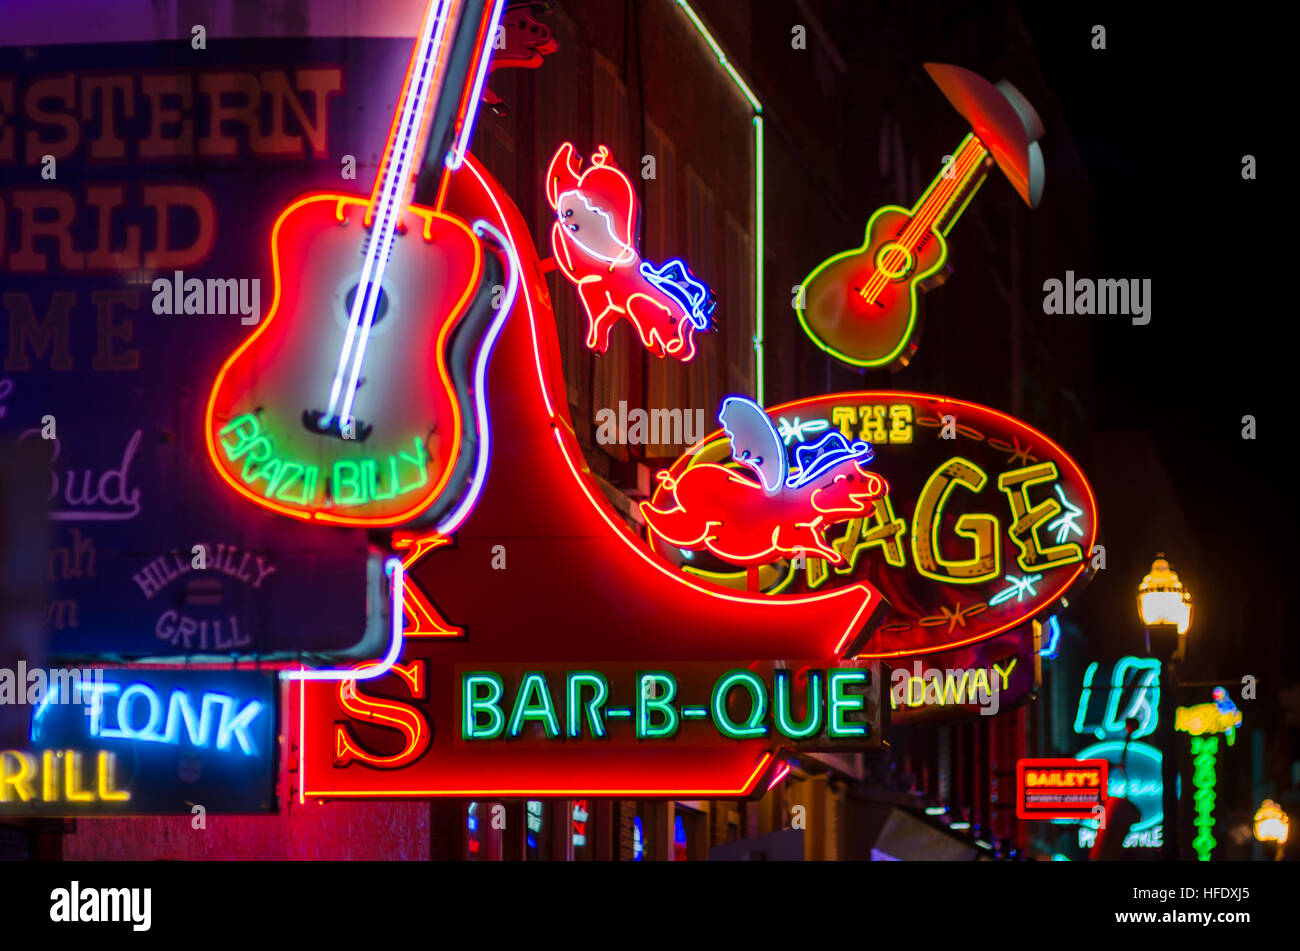 NASHVILLE - JULY 10, 2014: Bright neon signs of the city's honky tonk bar scene line the Broadway entertainment district. Stock Photo